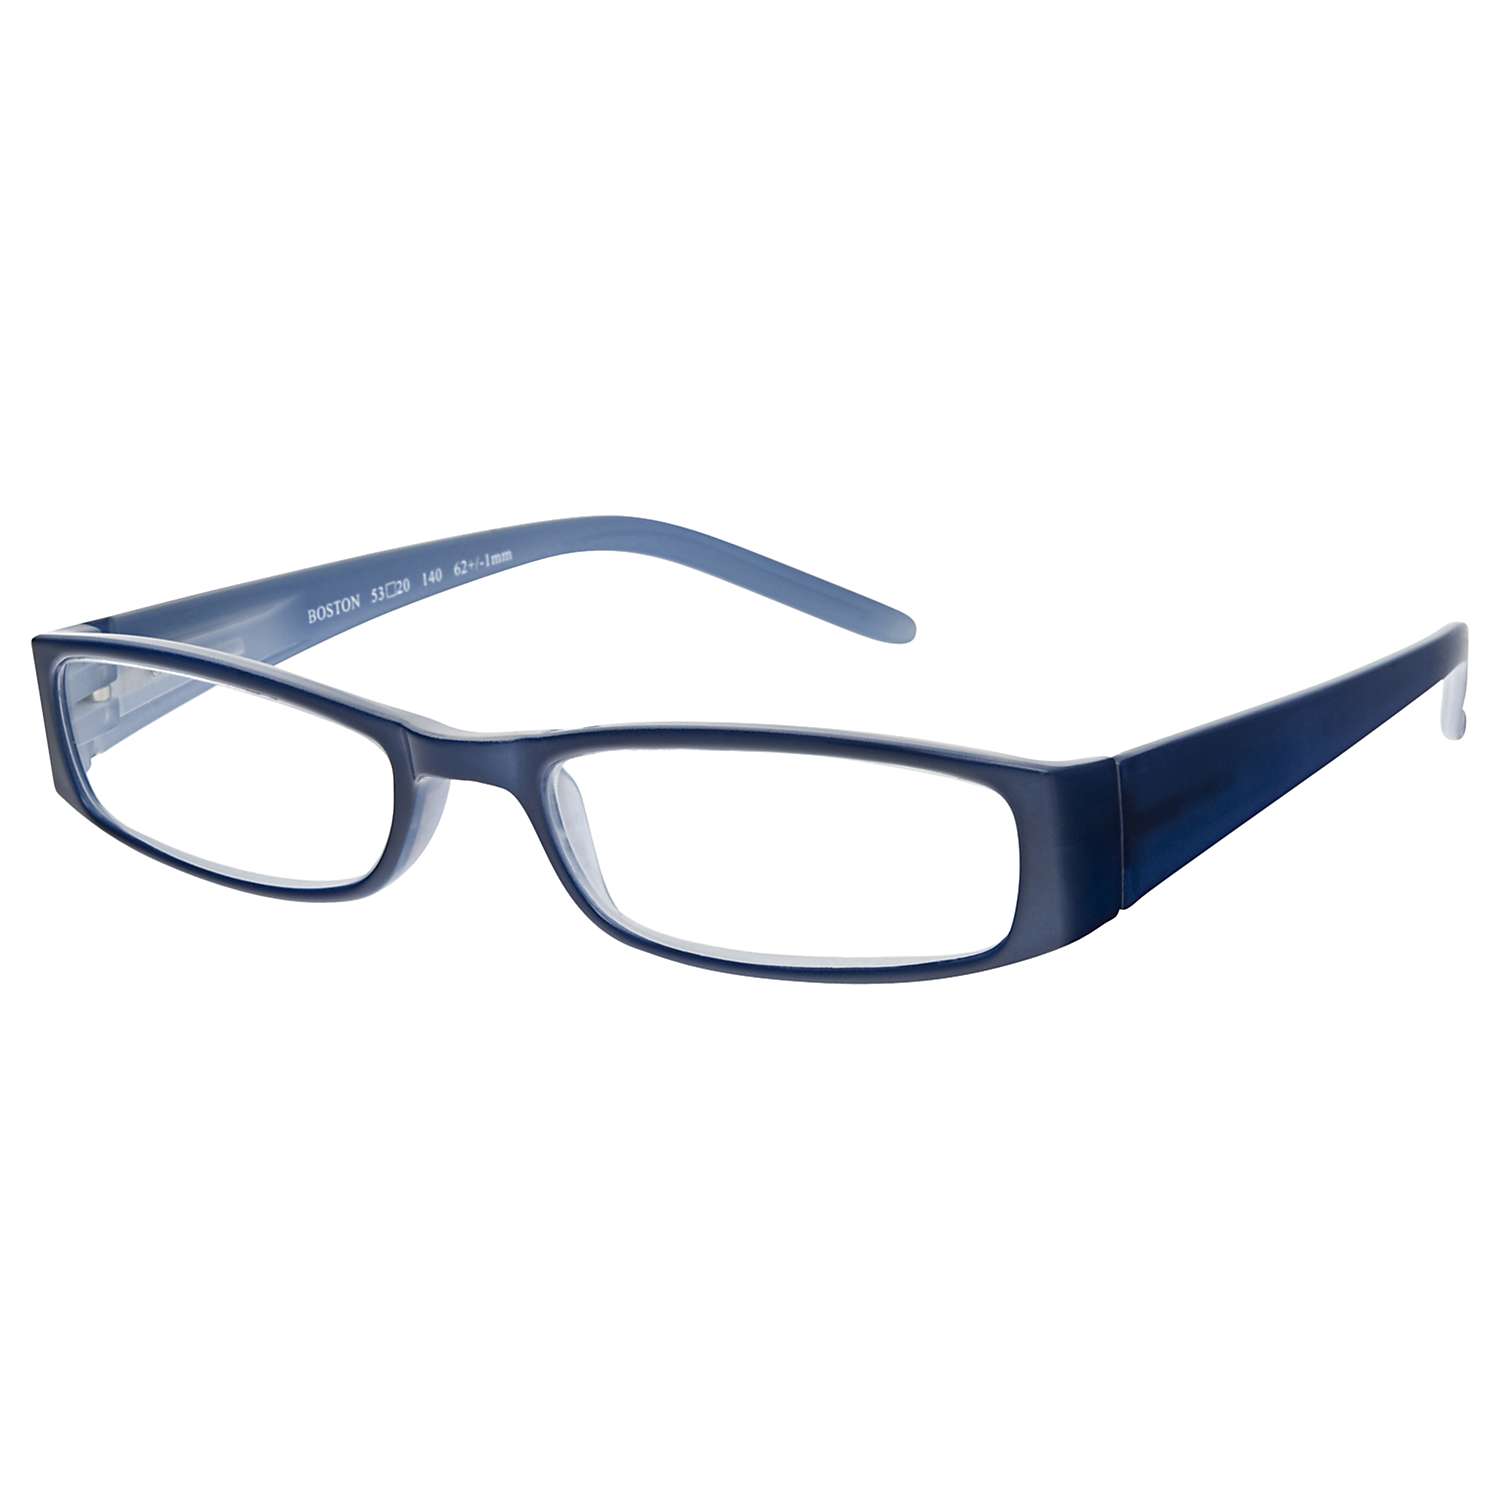 Buy Magnif Eyes Unisex Very Narrow Fit Ready Readers Boston Glasses Online at johnlewis.com